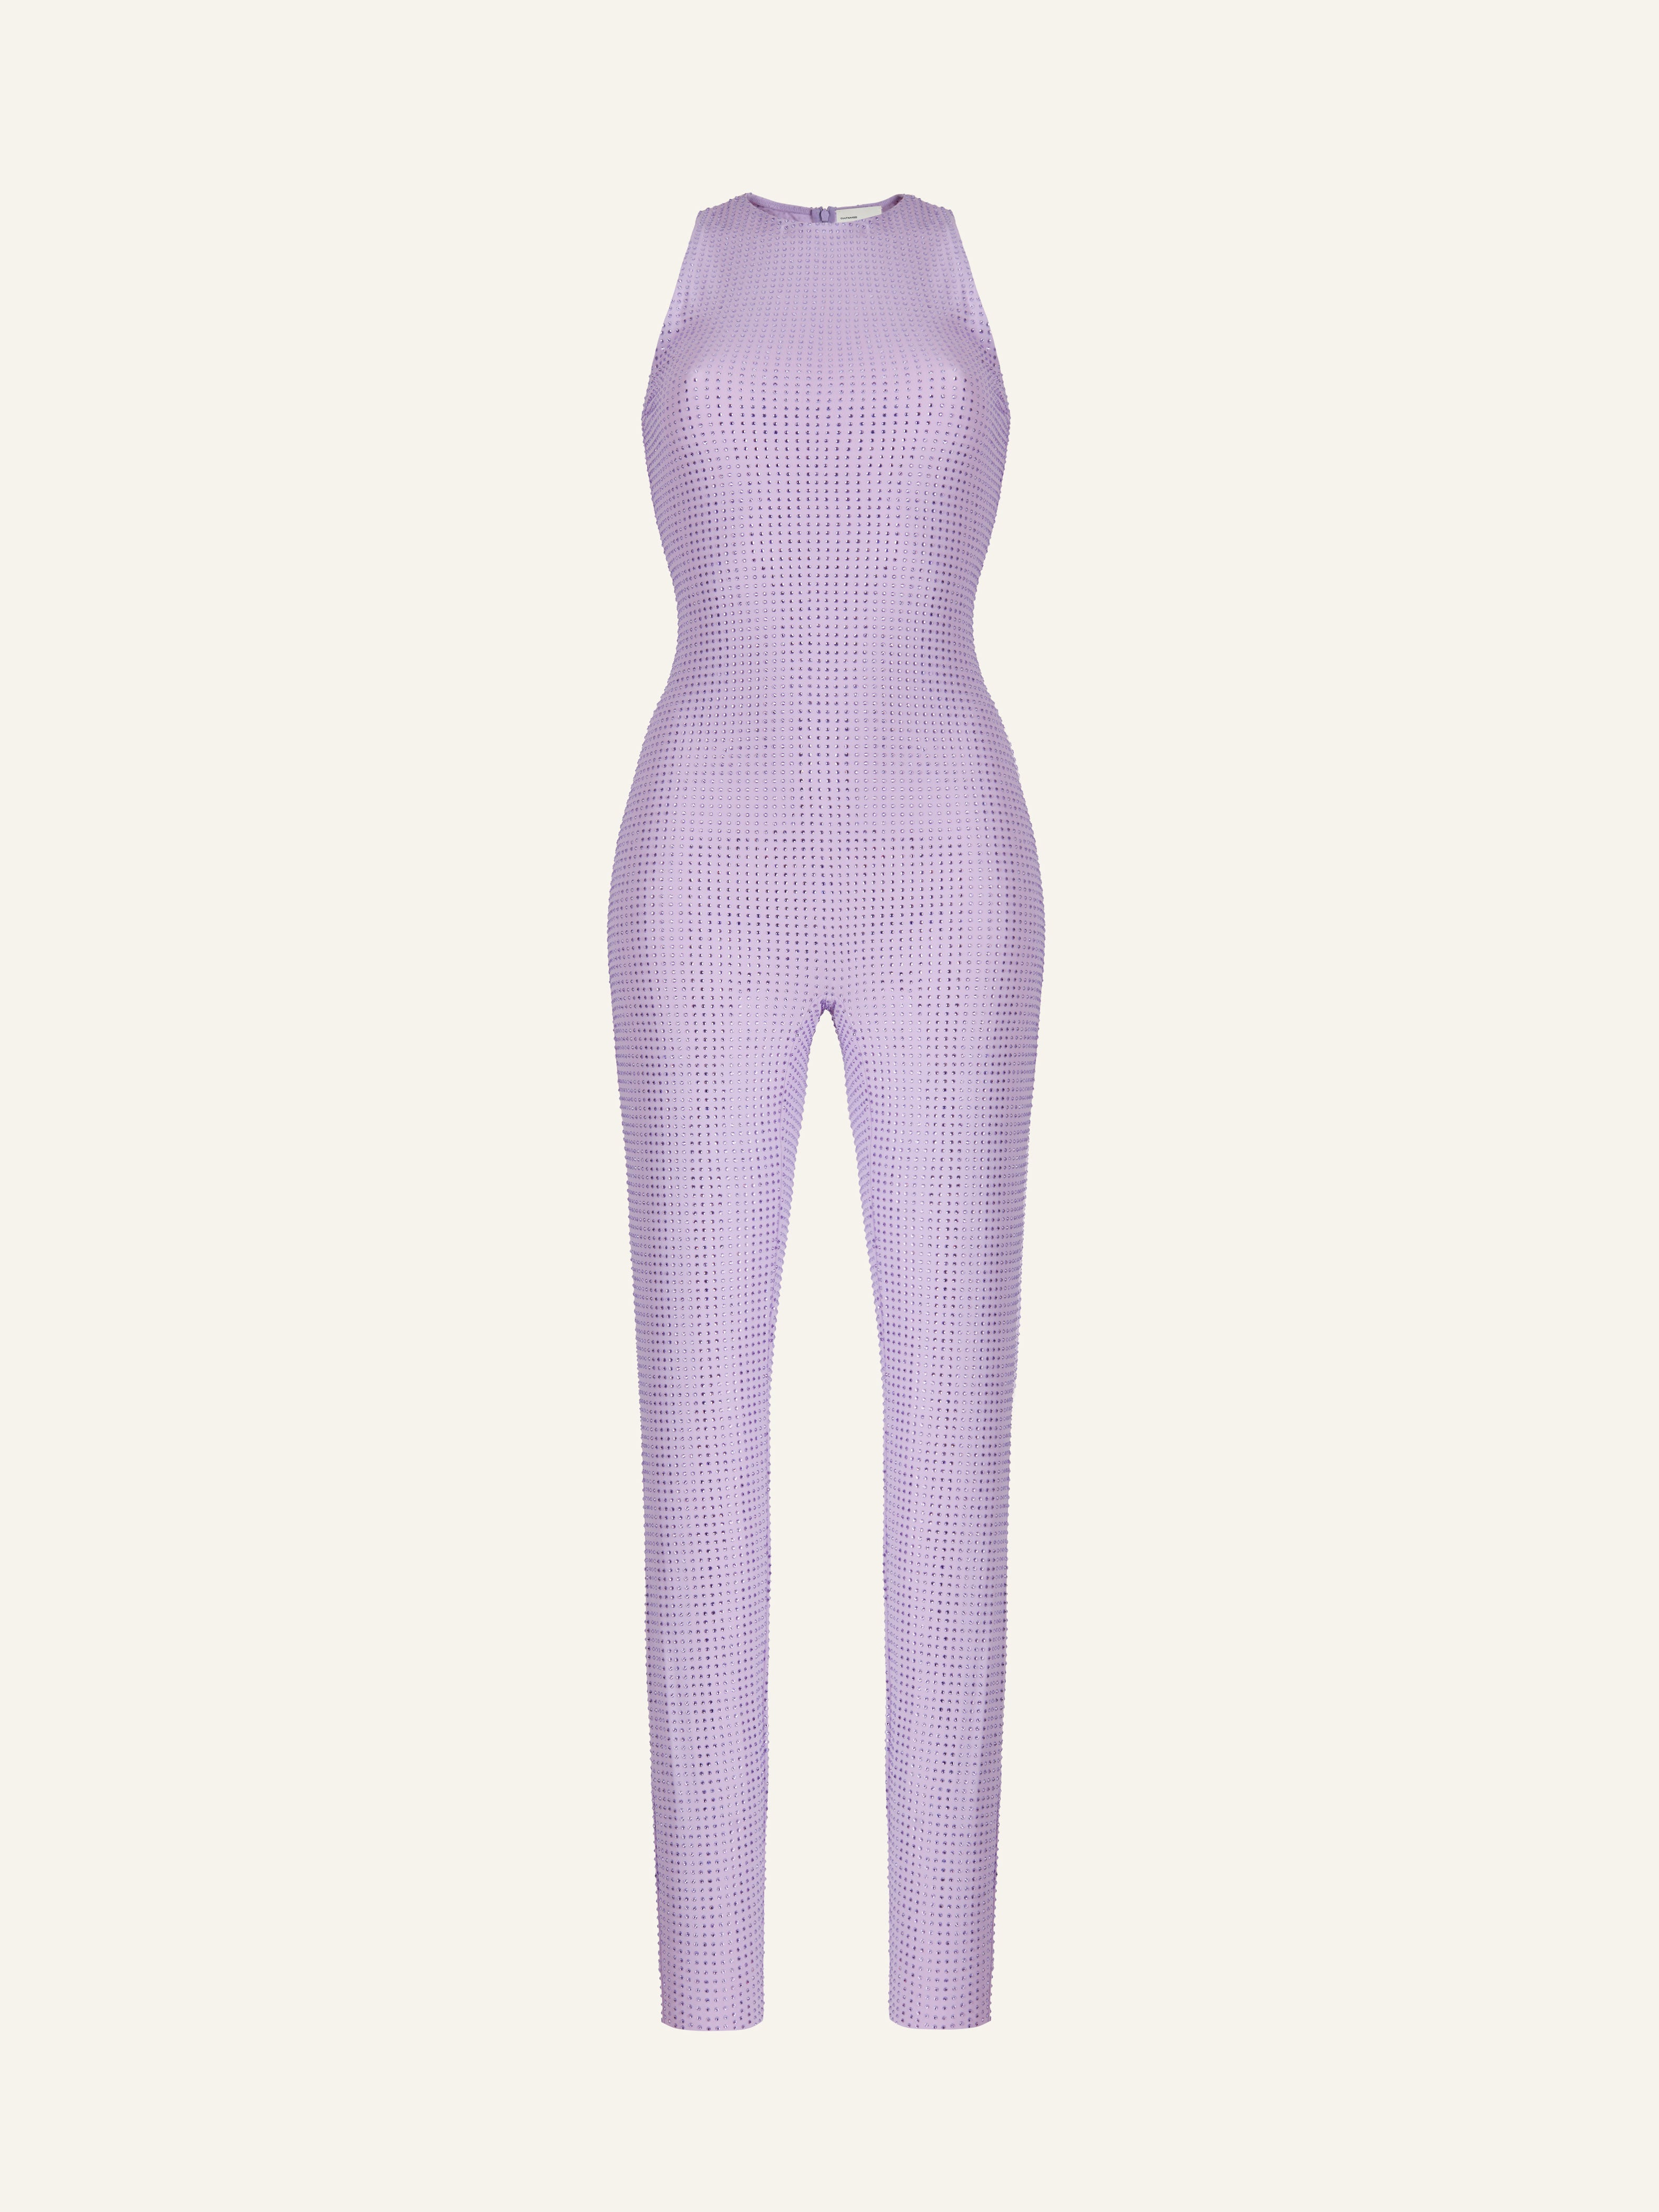 Product photo of a purple sleeveless jumpsuit decorated with Swarovski crystals